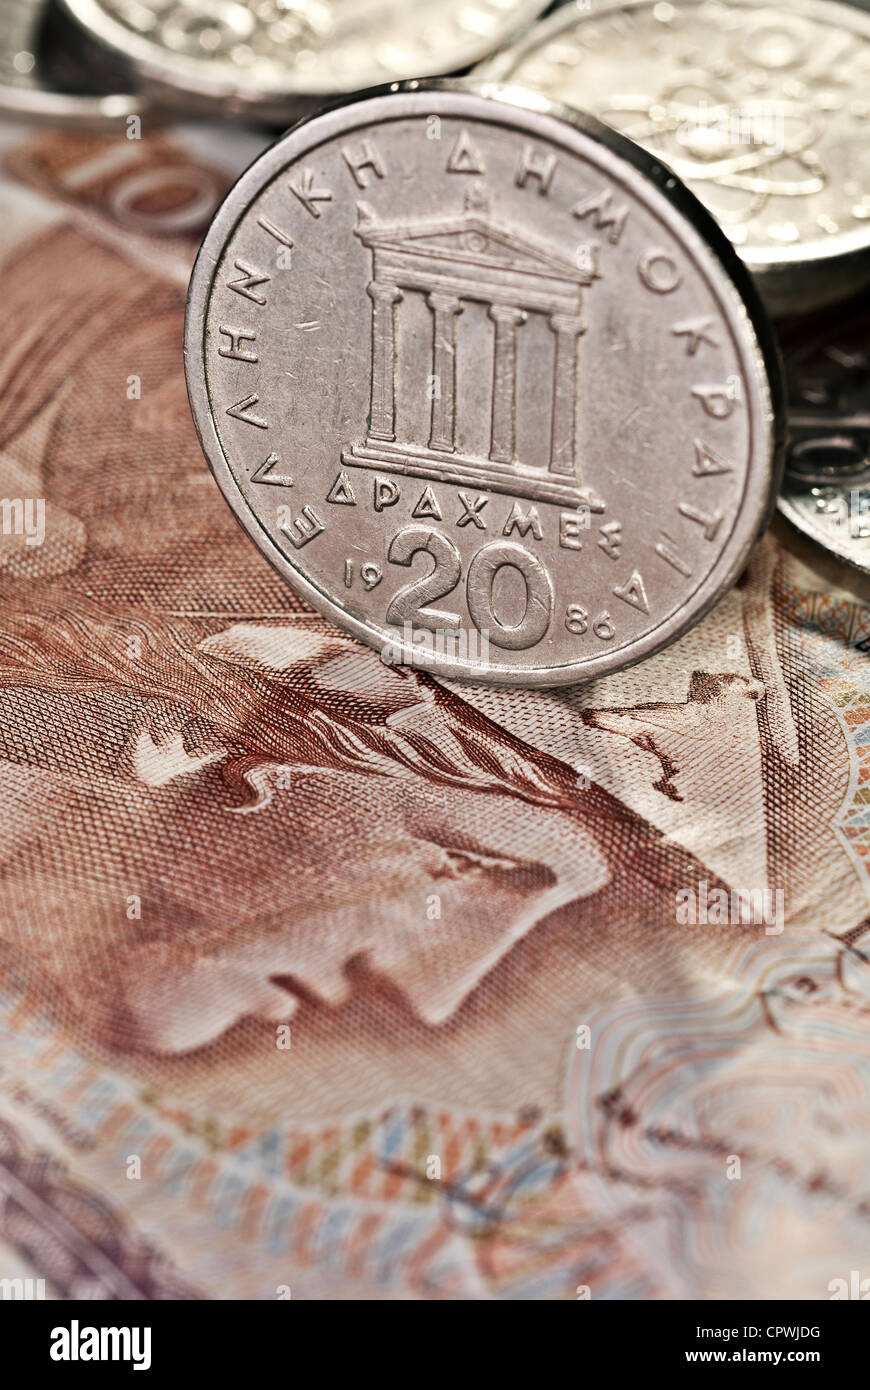 Greek drachma as coins and paper money. Stock Photo